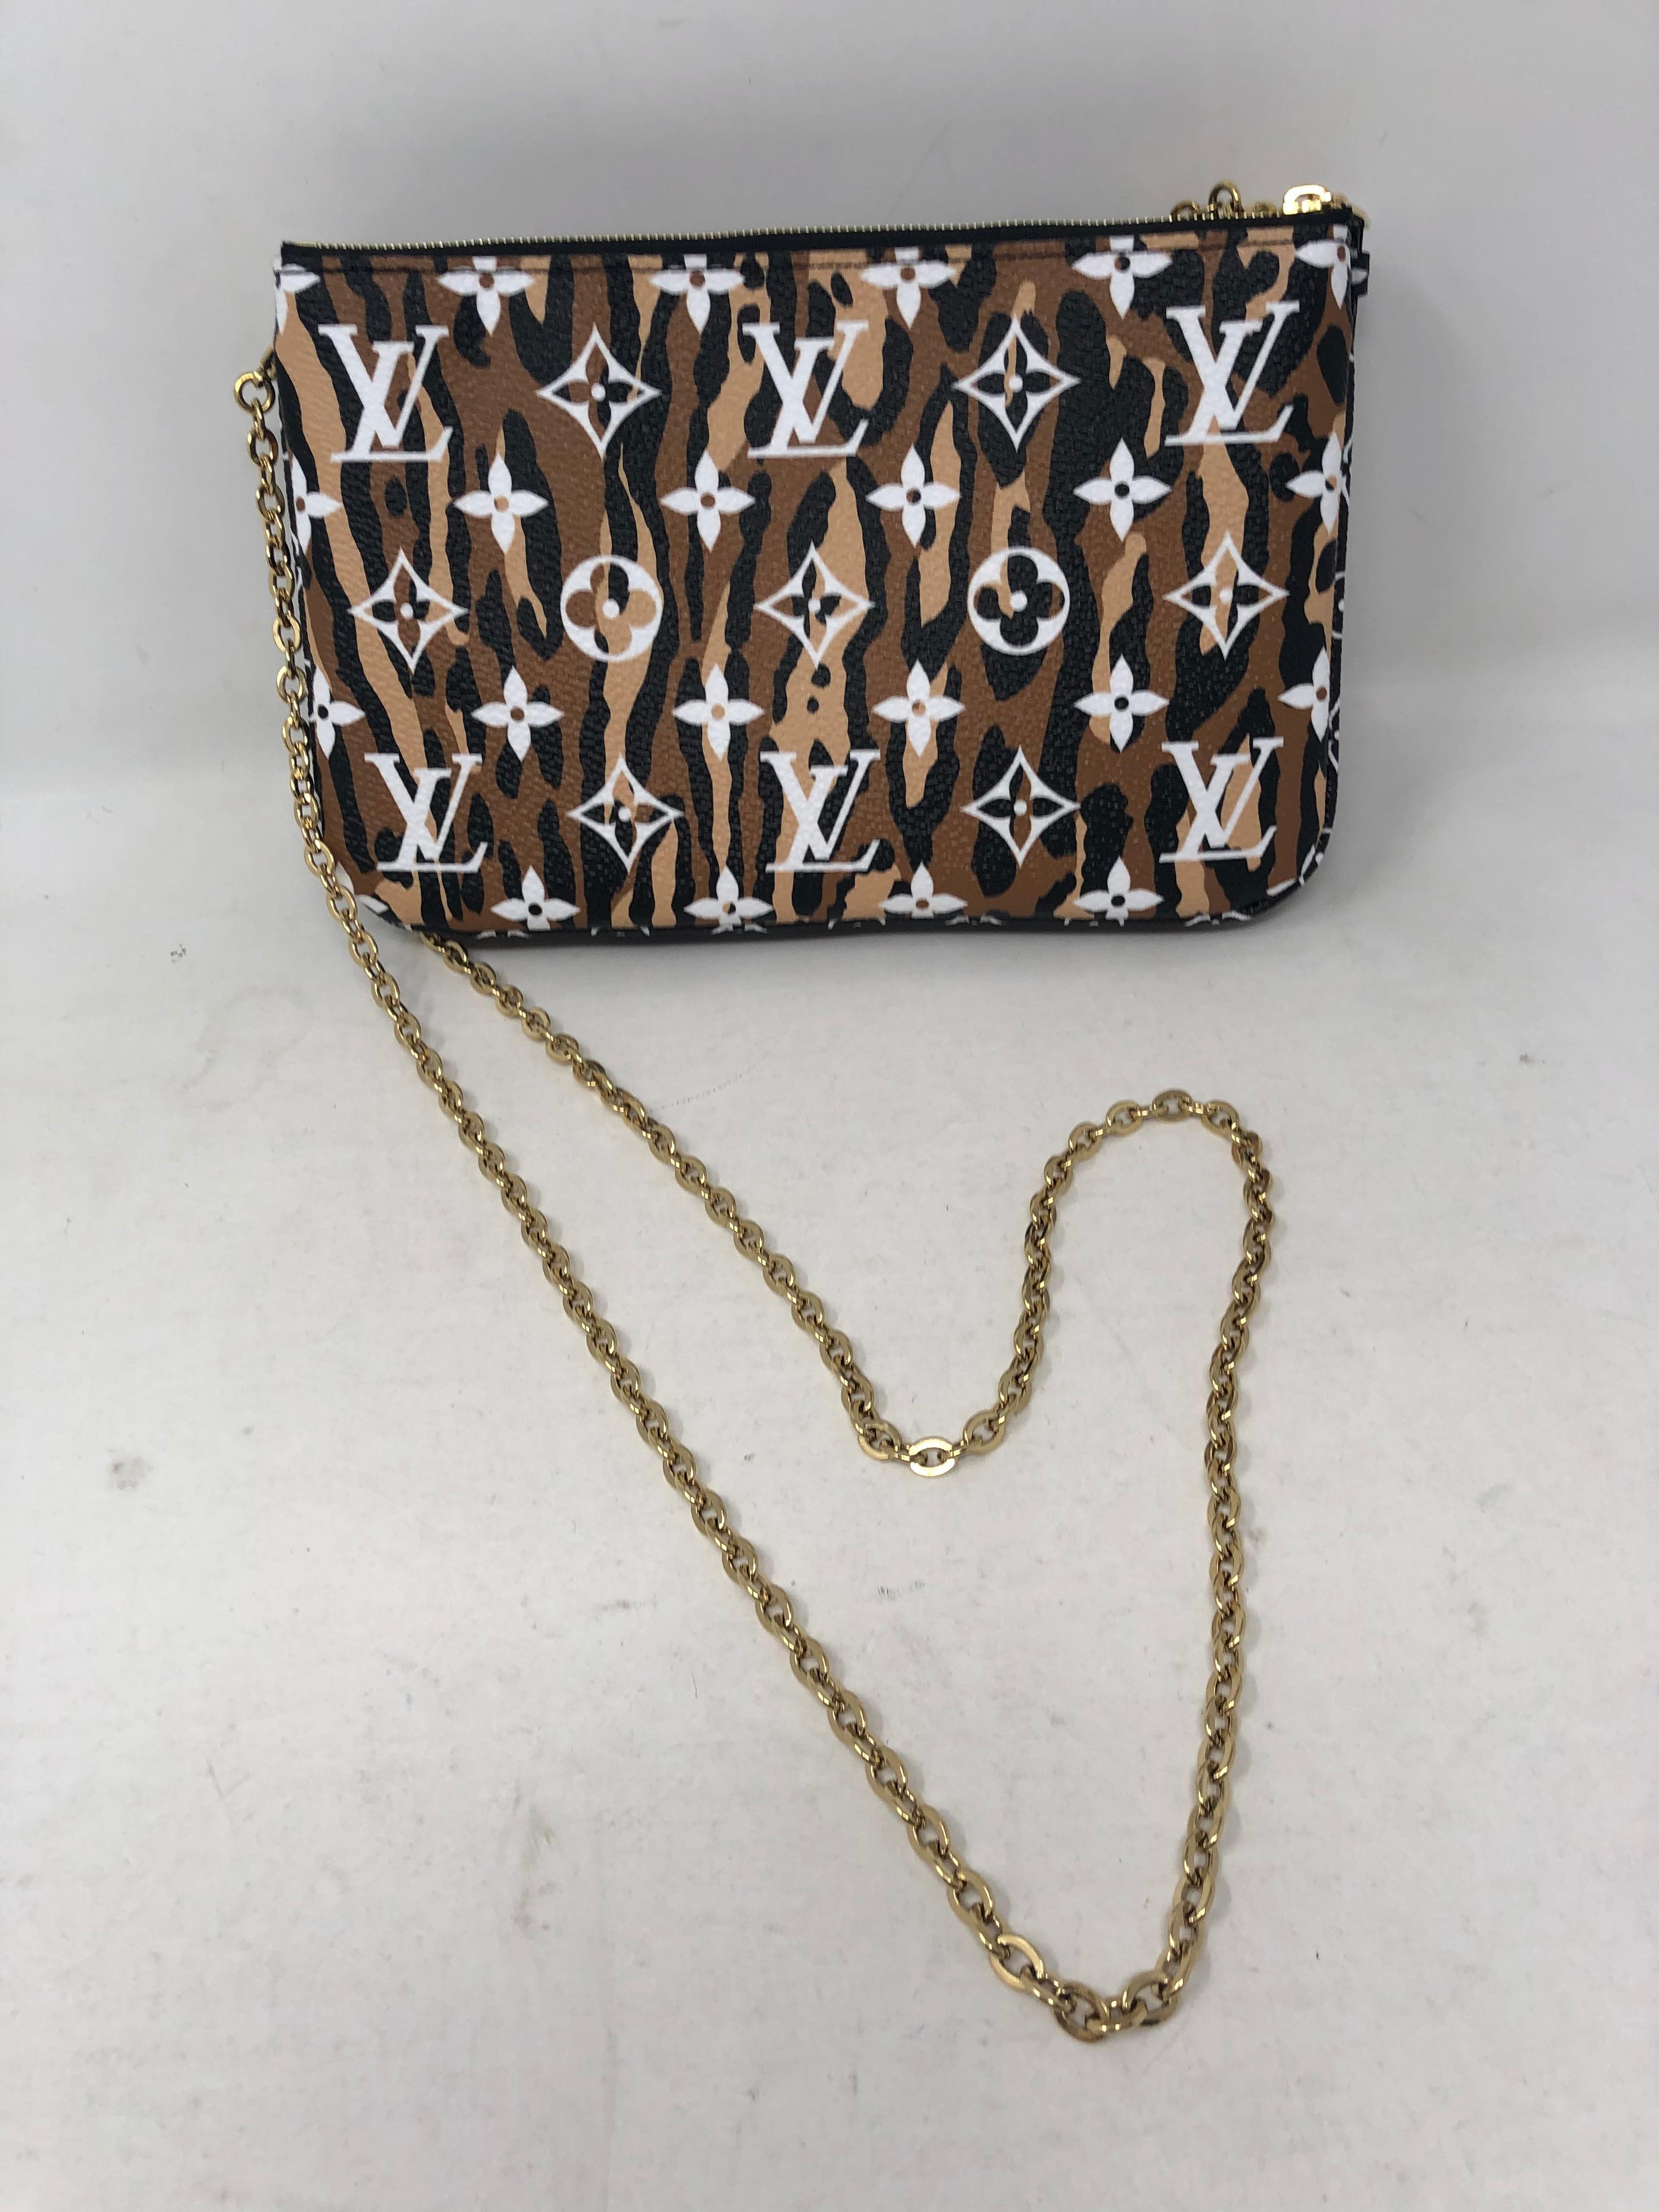 Louis Vuitton Giant Jungle Pochette Double Zip Black. Can be worn as a clutch or as a crossbody bag. Long gold chain can be taken off. Plenty of room in the double sections of the pouch. Brand new and sold out at LV. Limited edition. Guaranteed